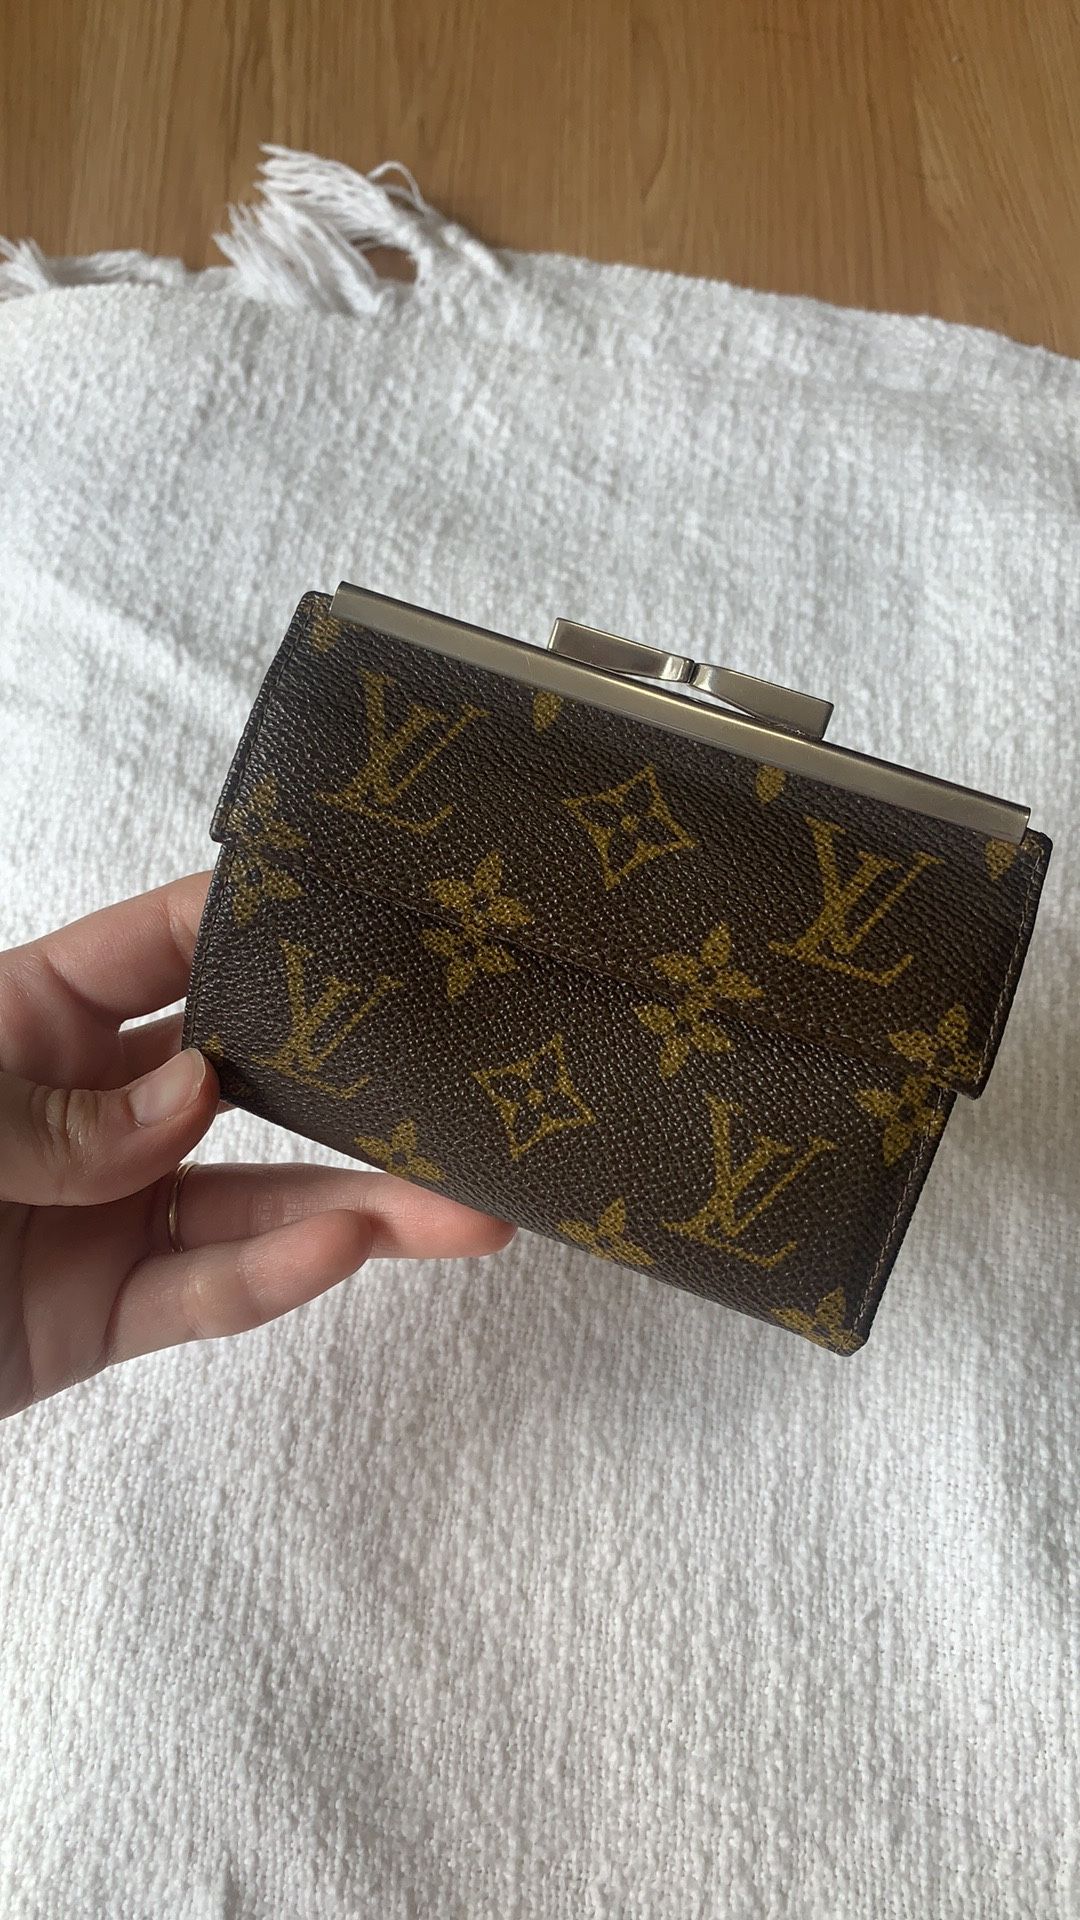 Vintage Louis Vuitton French Coin Purse and Billfold Wallet 